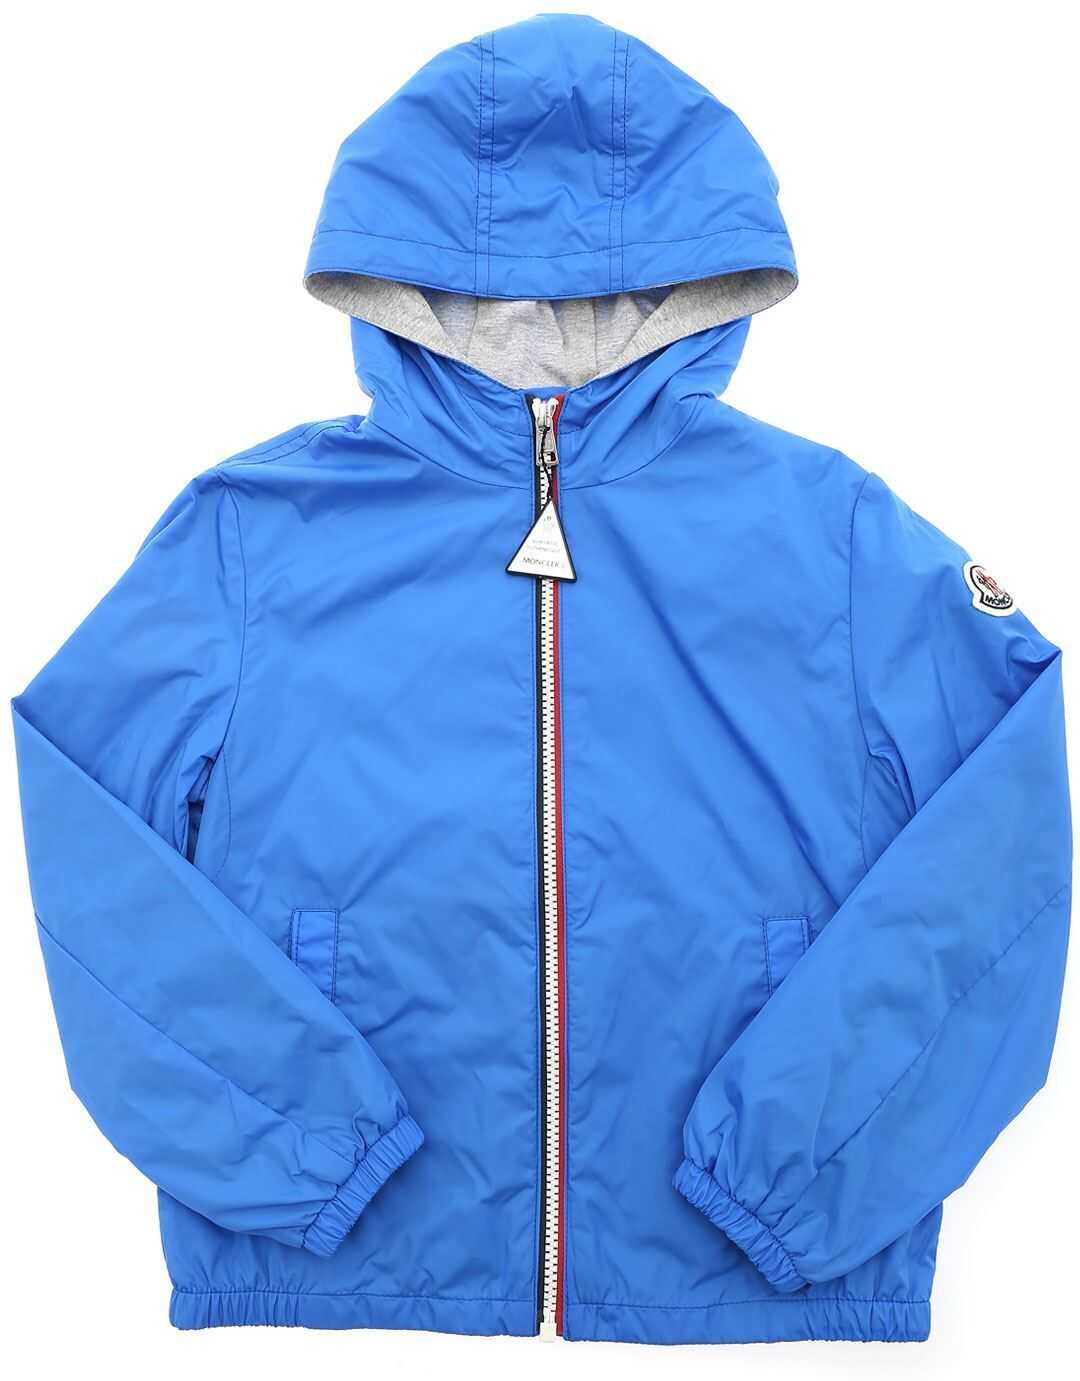 Moncler Kids New Urville Jacket In Turquoise 1A7222068352719 Turquoise